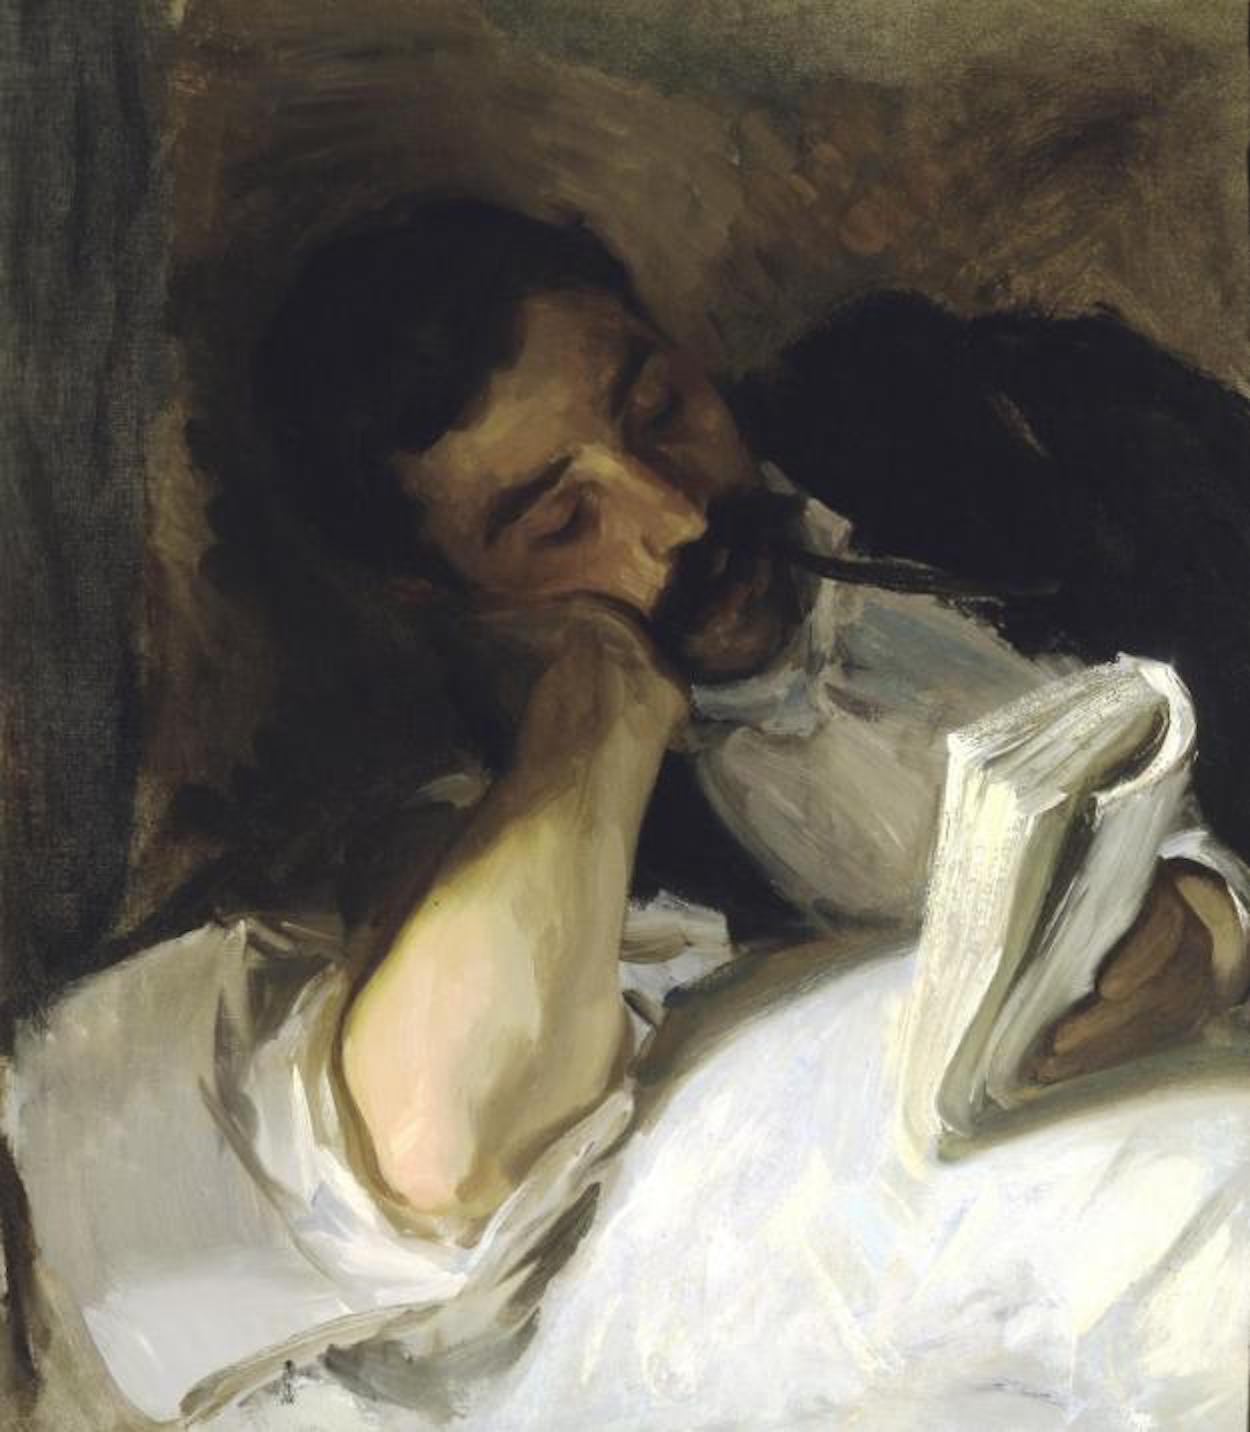 Man Reading (Nicola d’Inverno) by John Singer Sargent - c. 1904-1908 - 25.25 x 22.25 in. Reading Public Museum